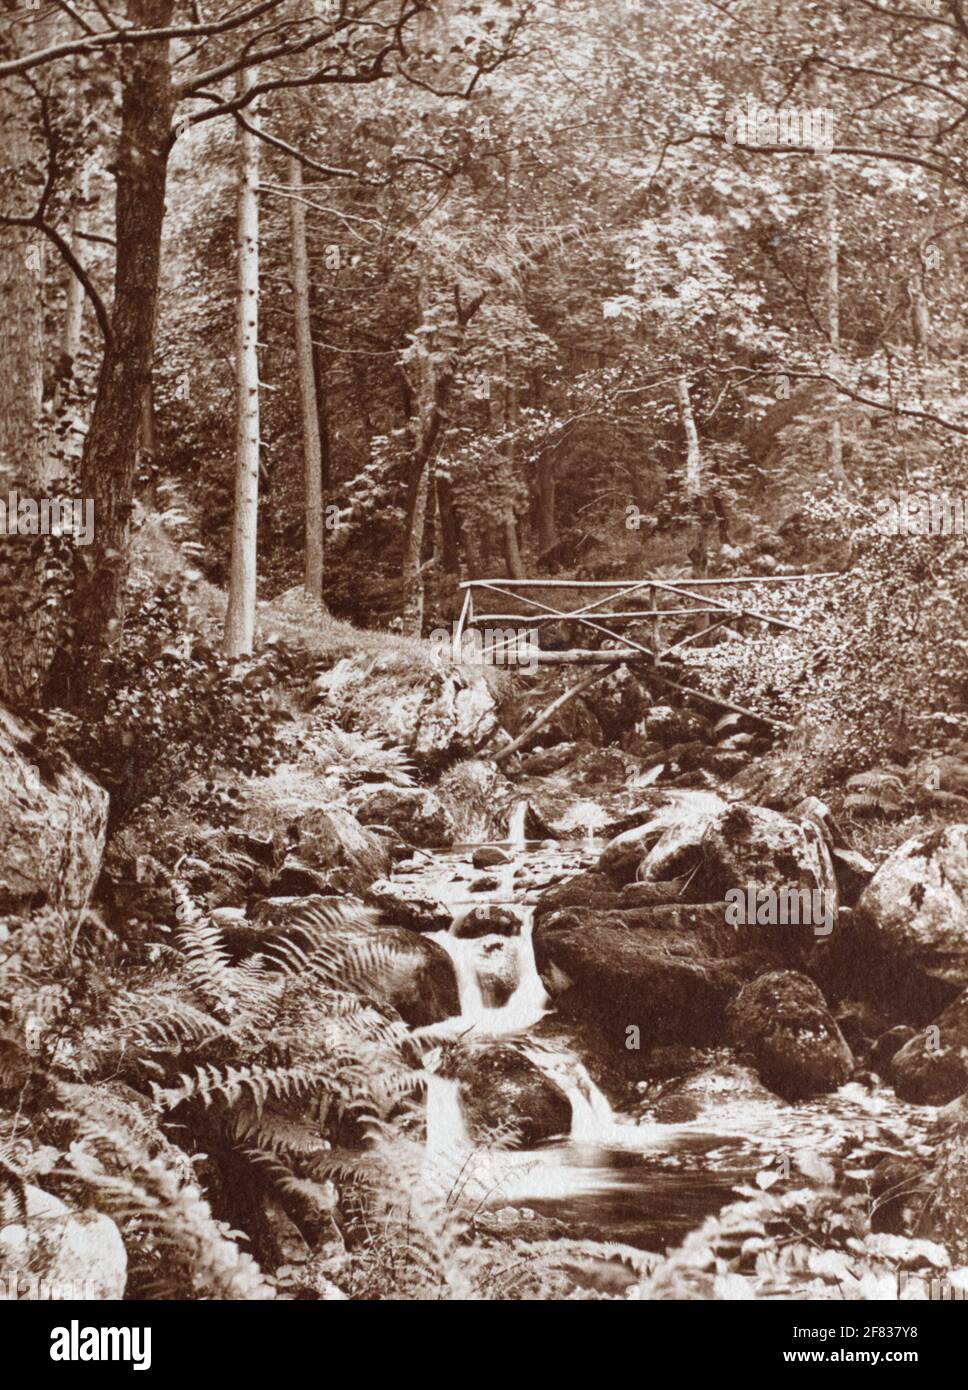 A historical view of a smal bridge over a waterfall in Fairy Glen near Penmaenmawr, Clwyd, Wales, UK, taken from a postcard c. 1903. Stock Photo